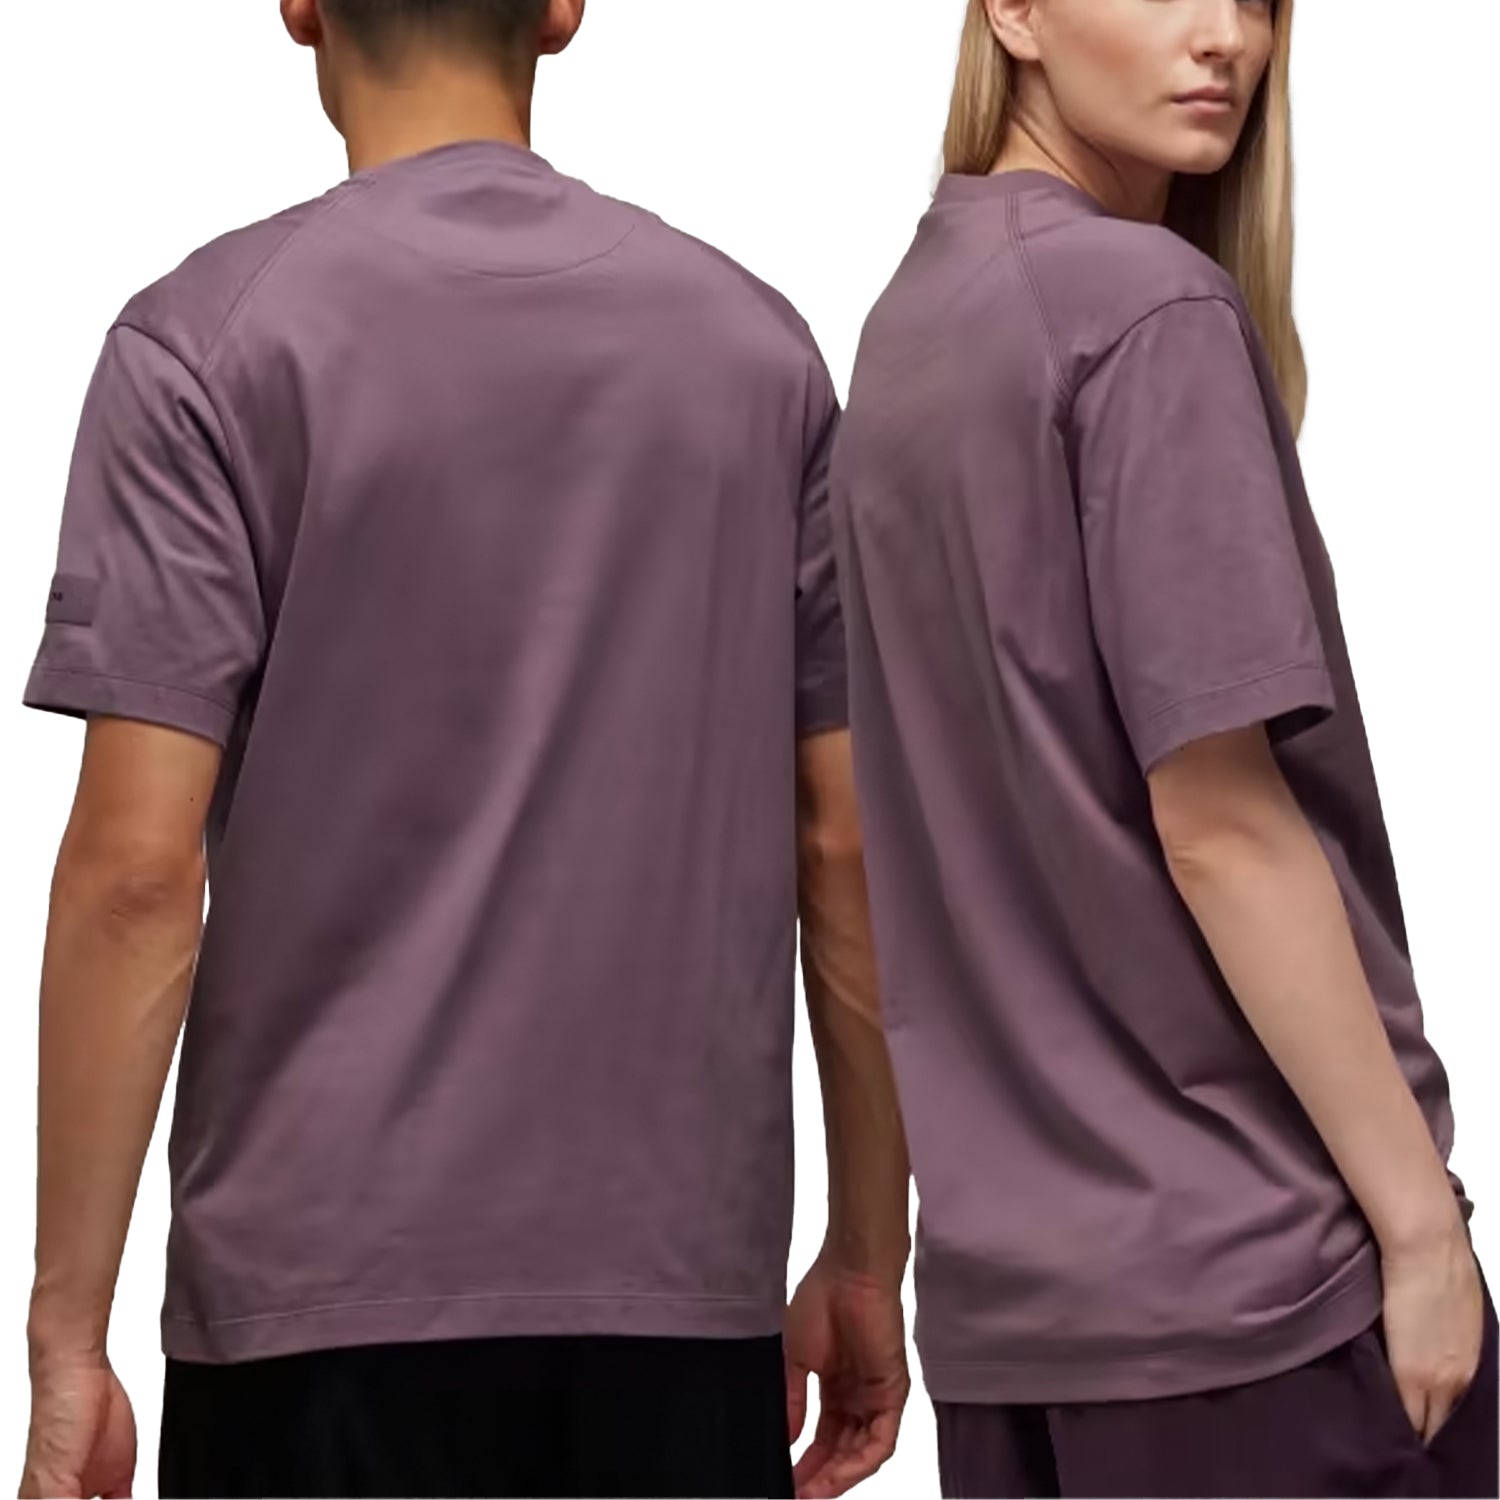 Y-3 Relaxed Short Sleeve Tee - INVINCIBLE